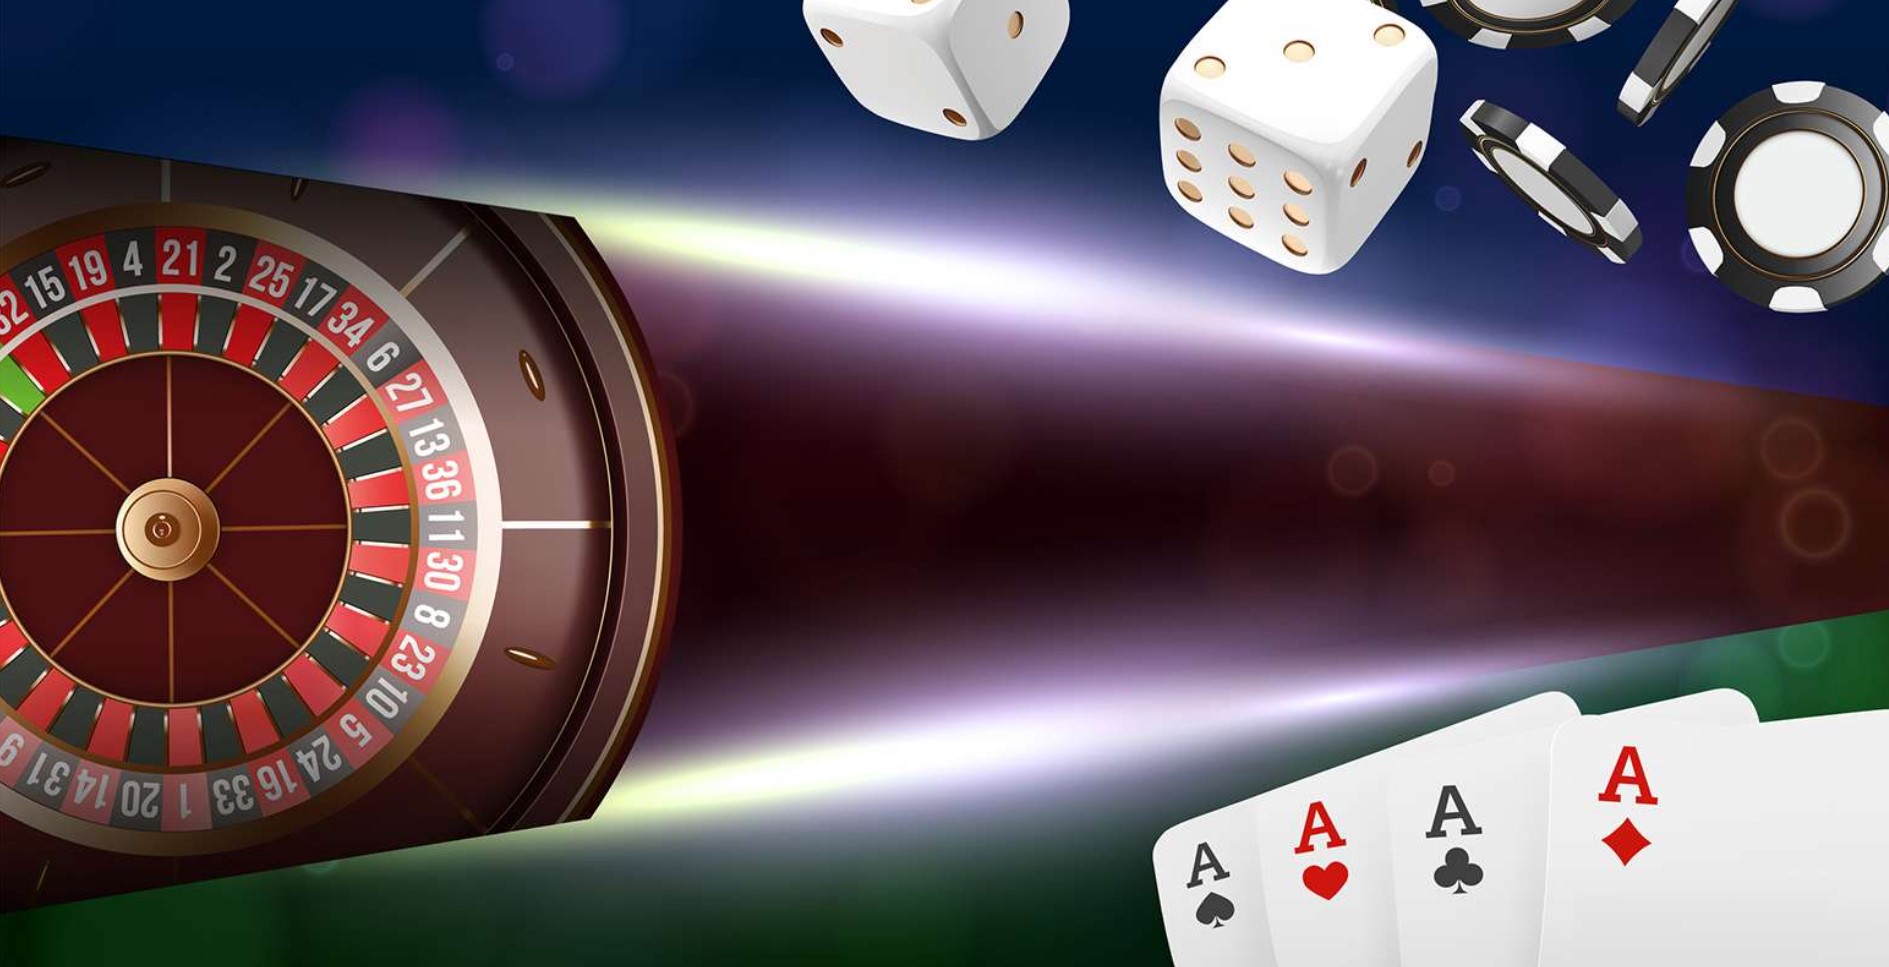 What betting strategies and systems are used when playing roulette